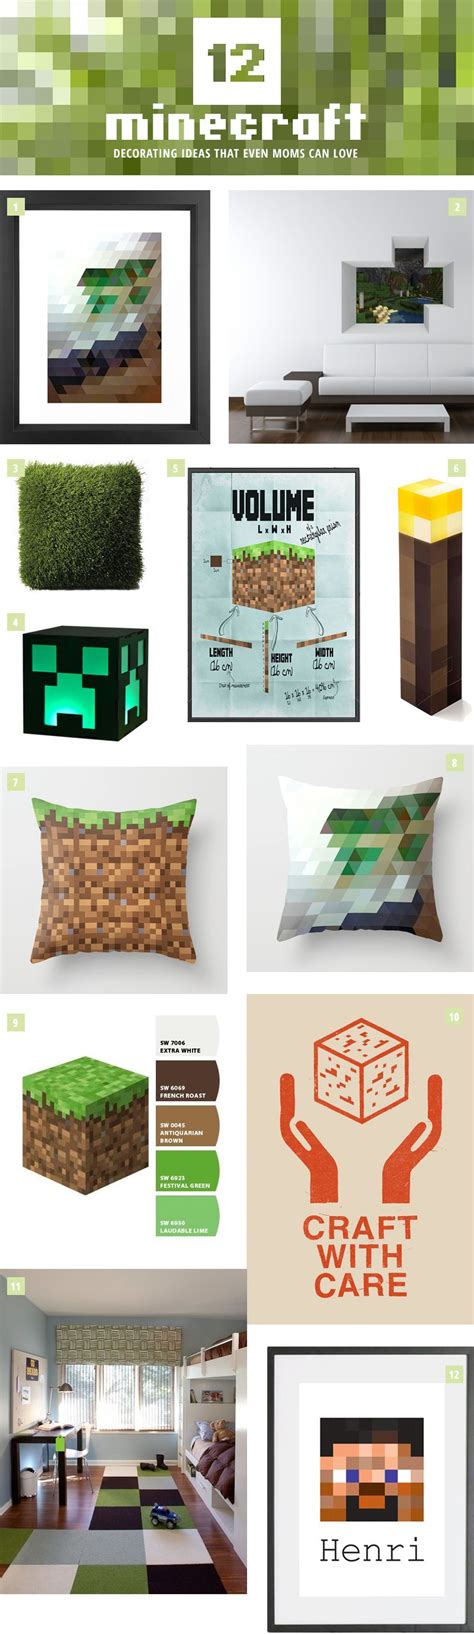 January 12, 2021 easy and creative minecraft bedroom ideas and themes you can use 12 Stylish Minecraft Decorating Ideas | Minecraft ...